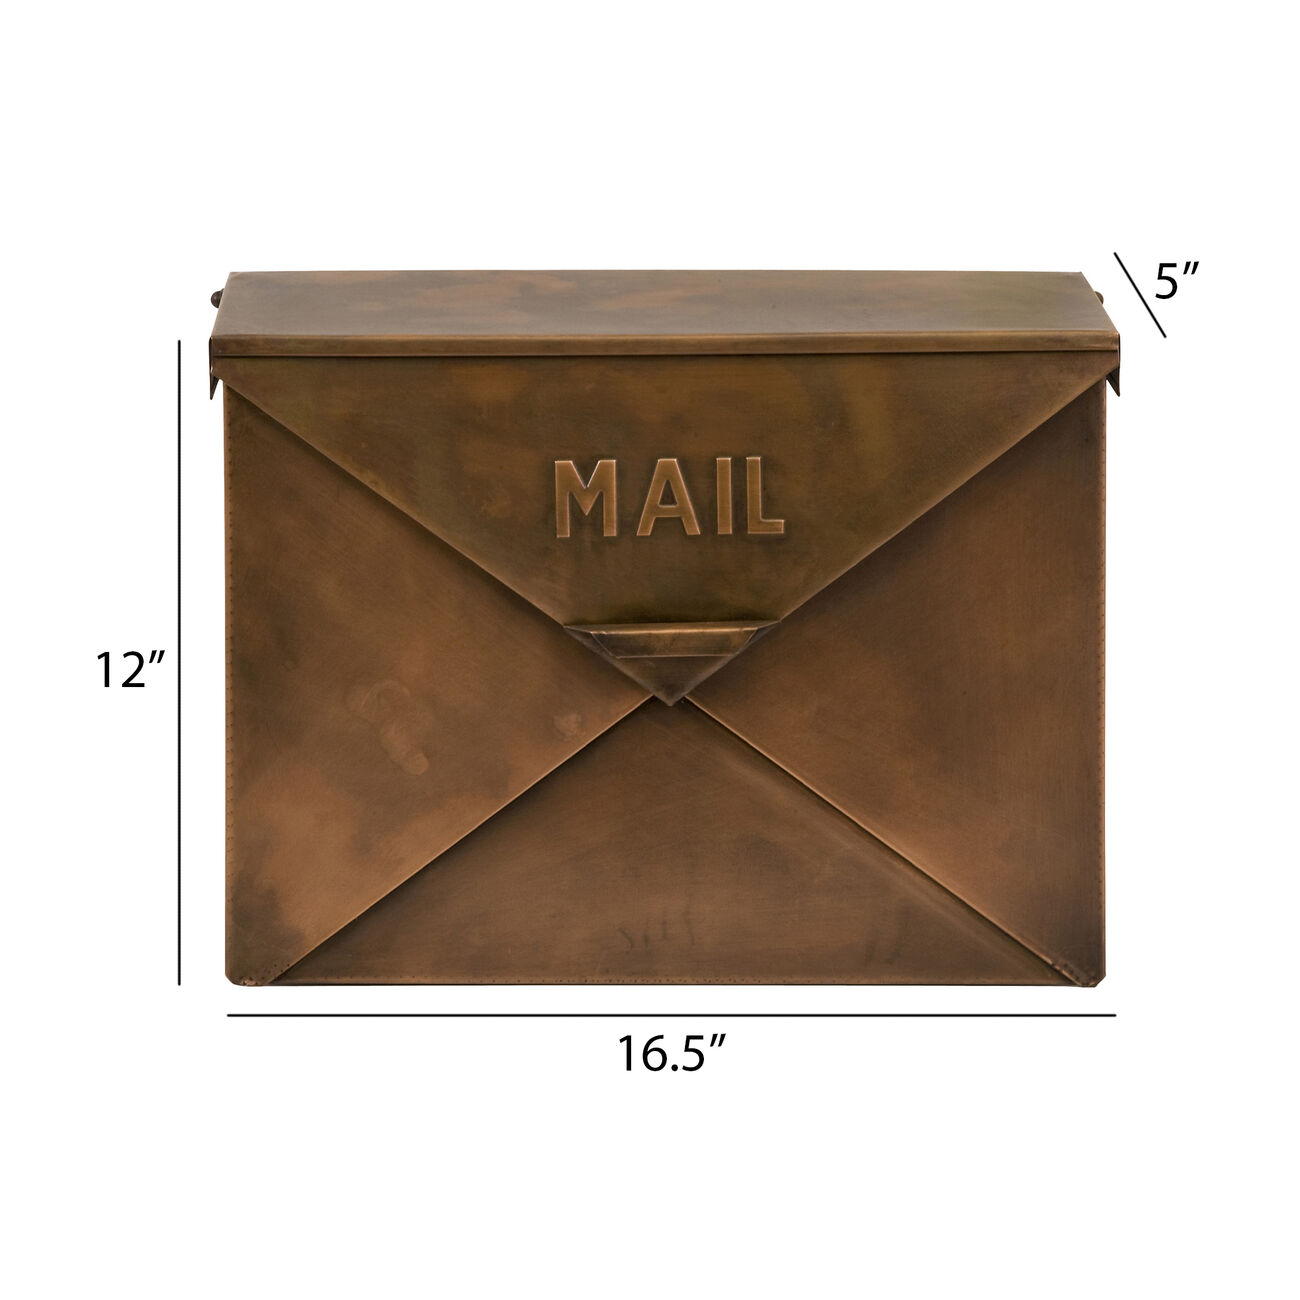 Spacious Envelope Shaped Wall Mount Iron Mail Box, Copper Finish